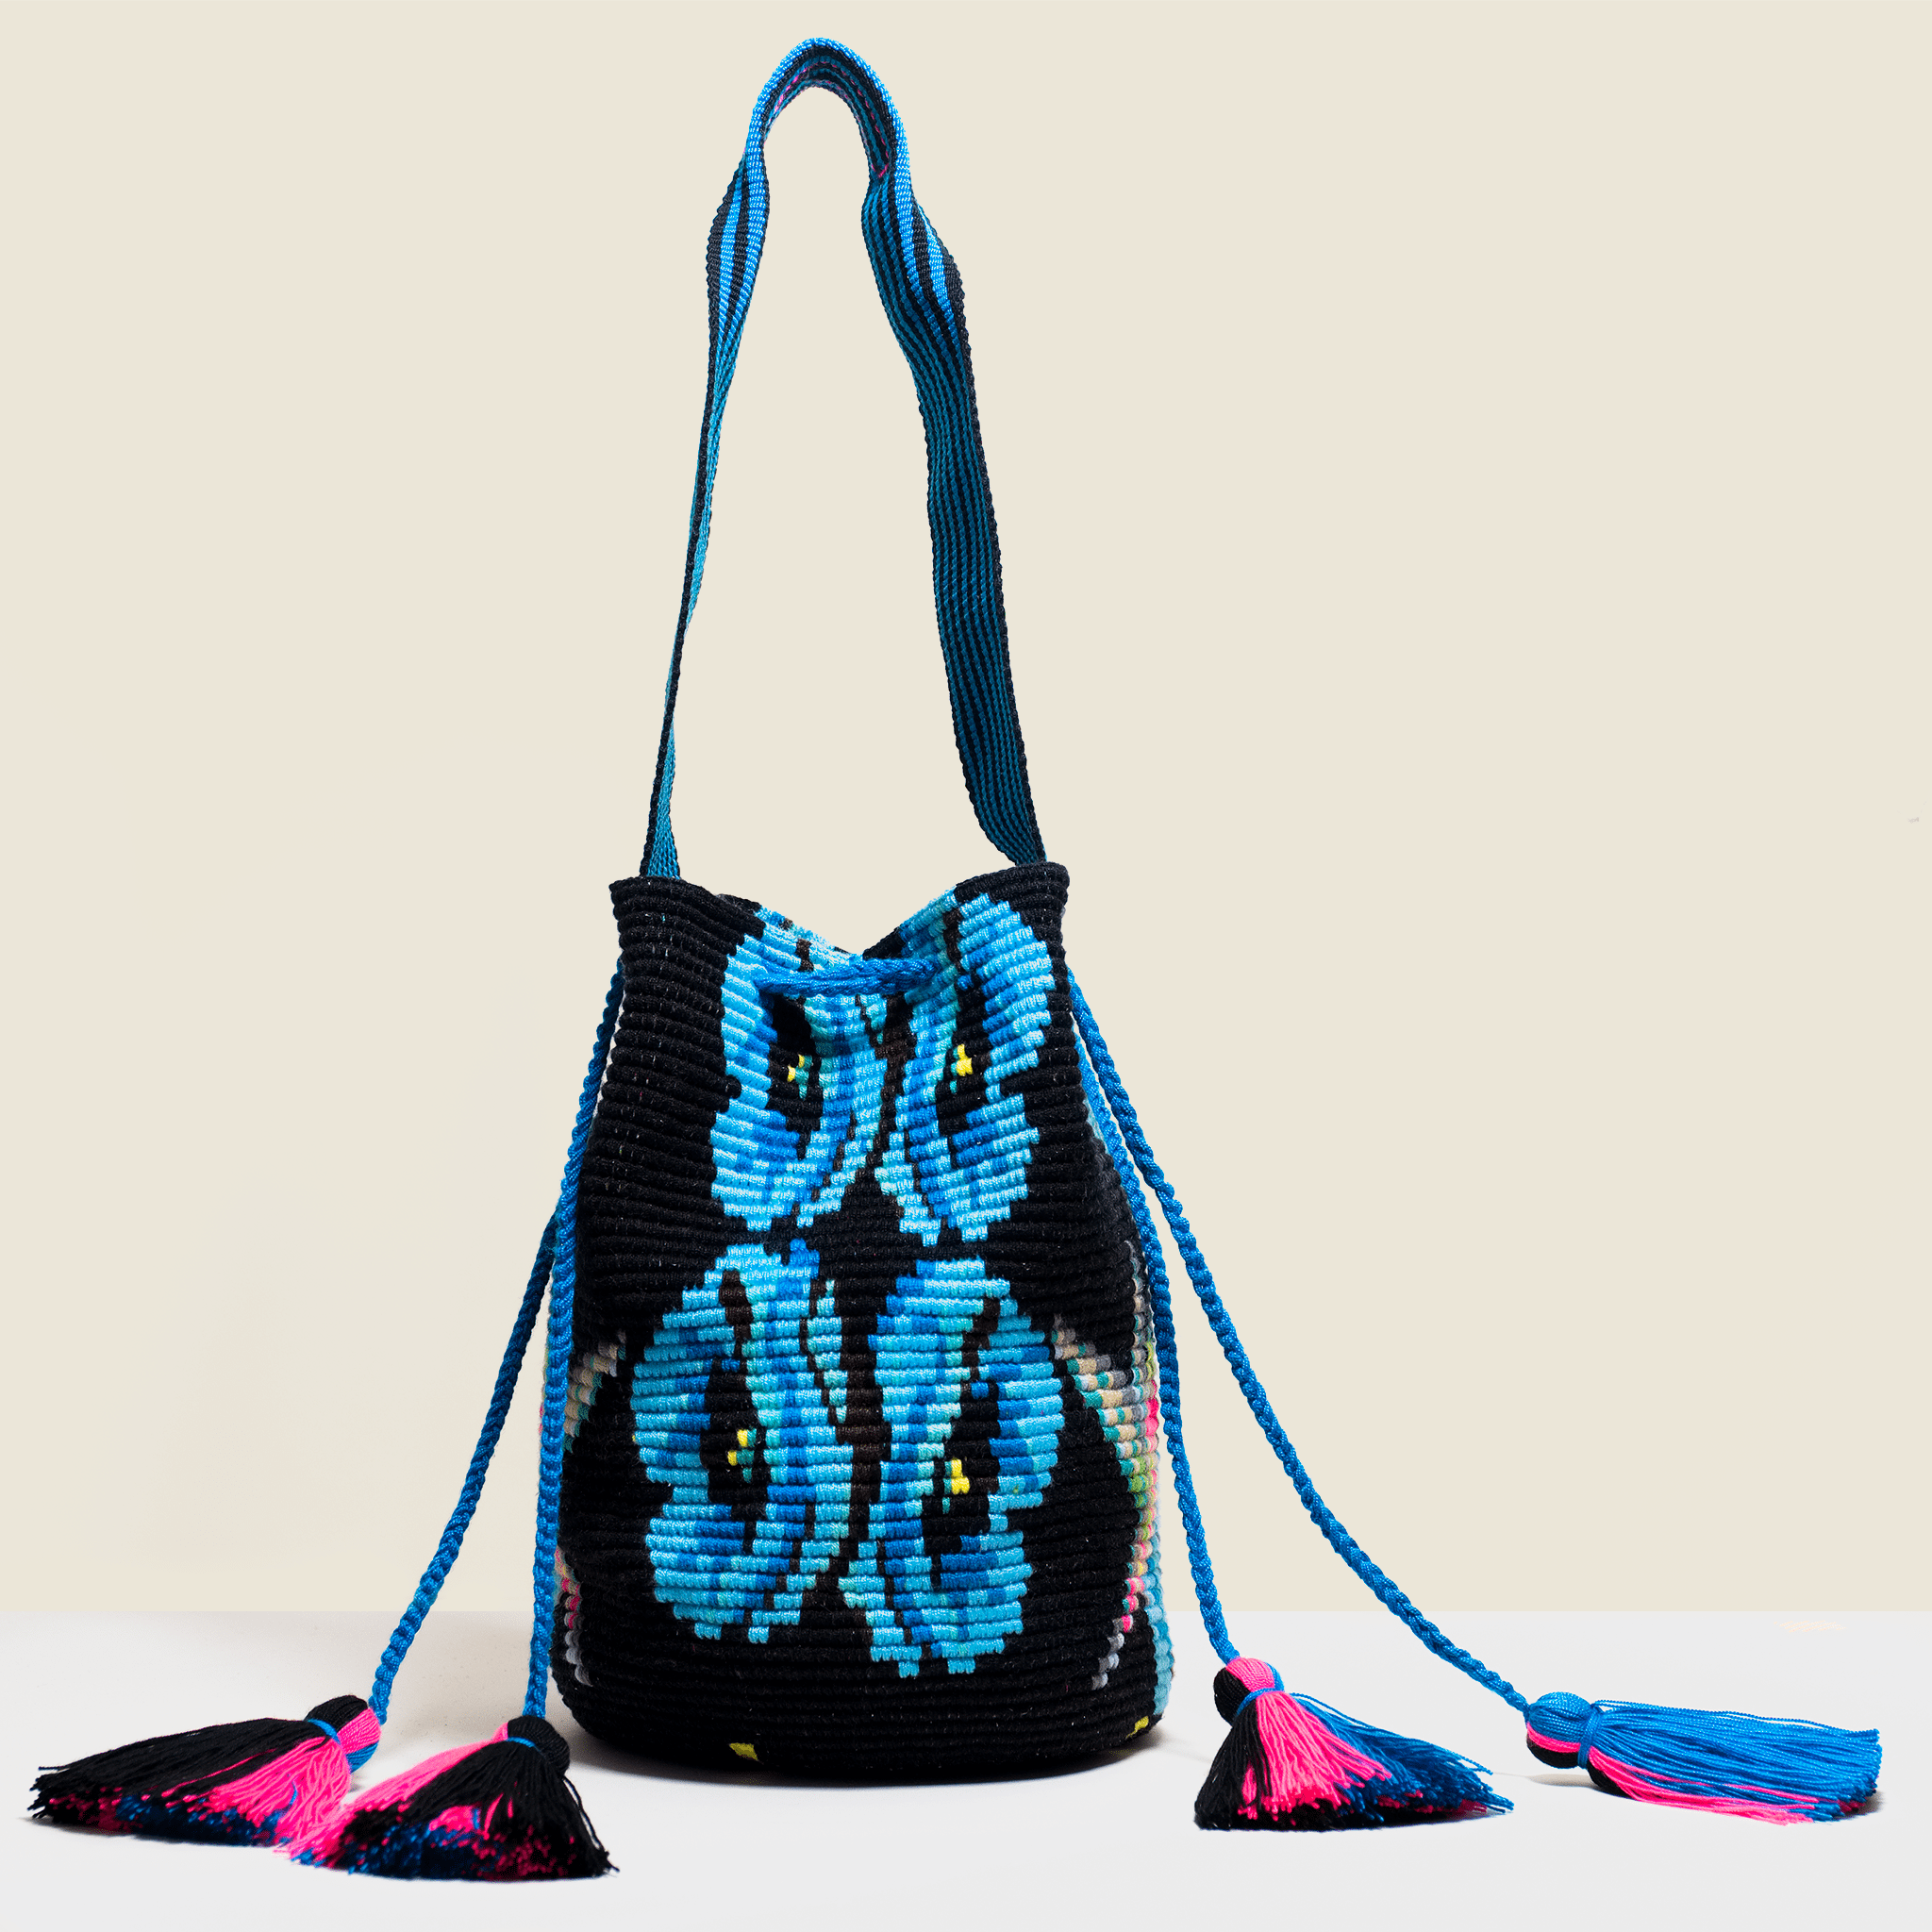 Boho chic crochet cross-body bag in black with blue flowers and pink tassels